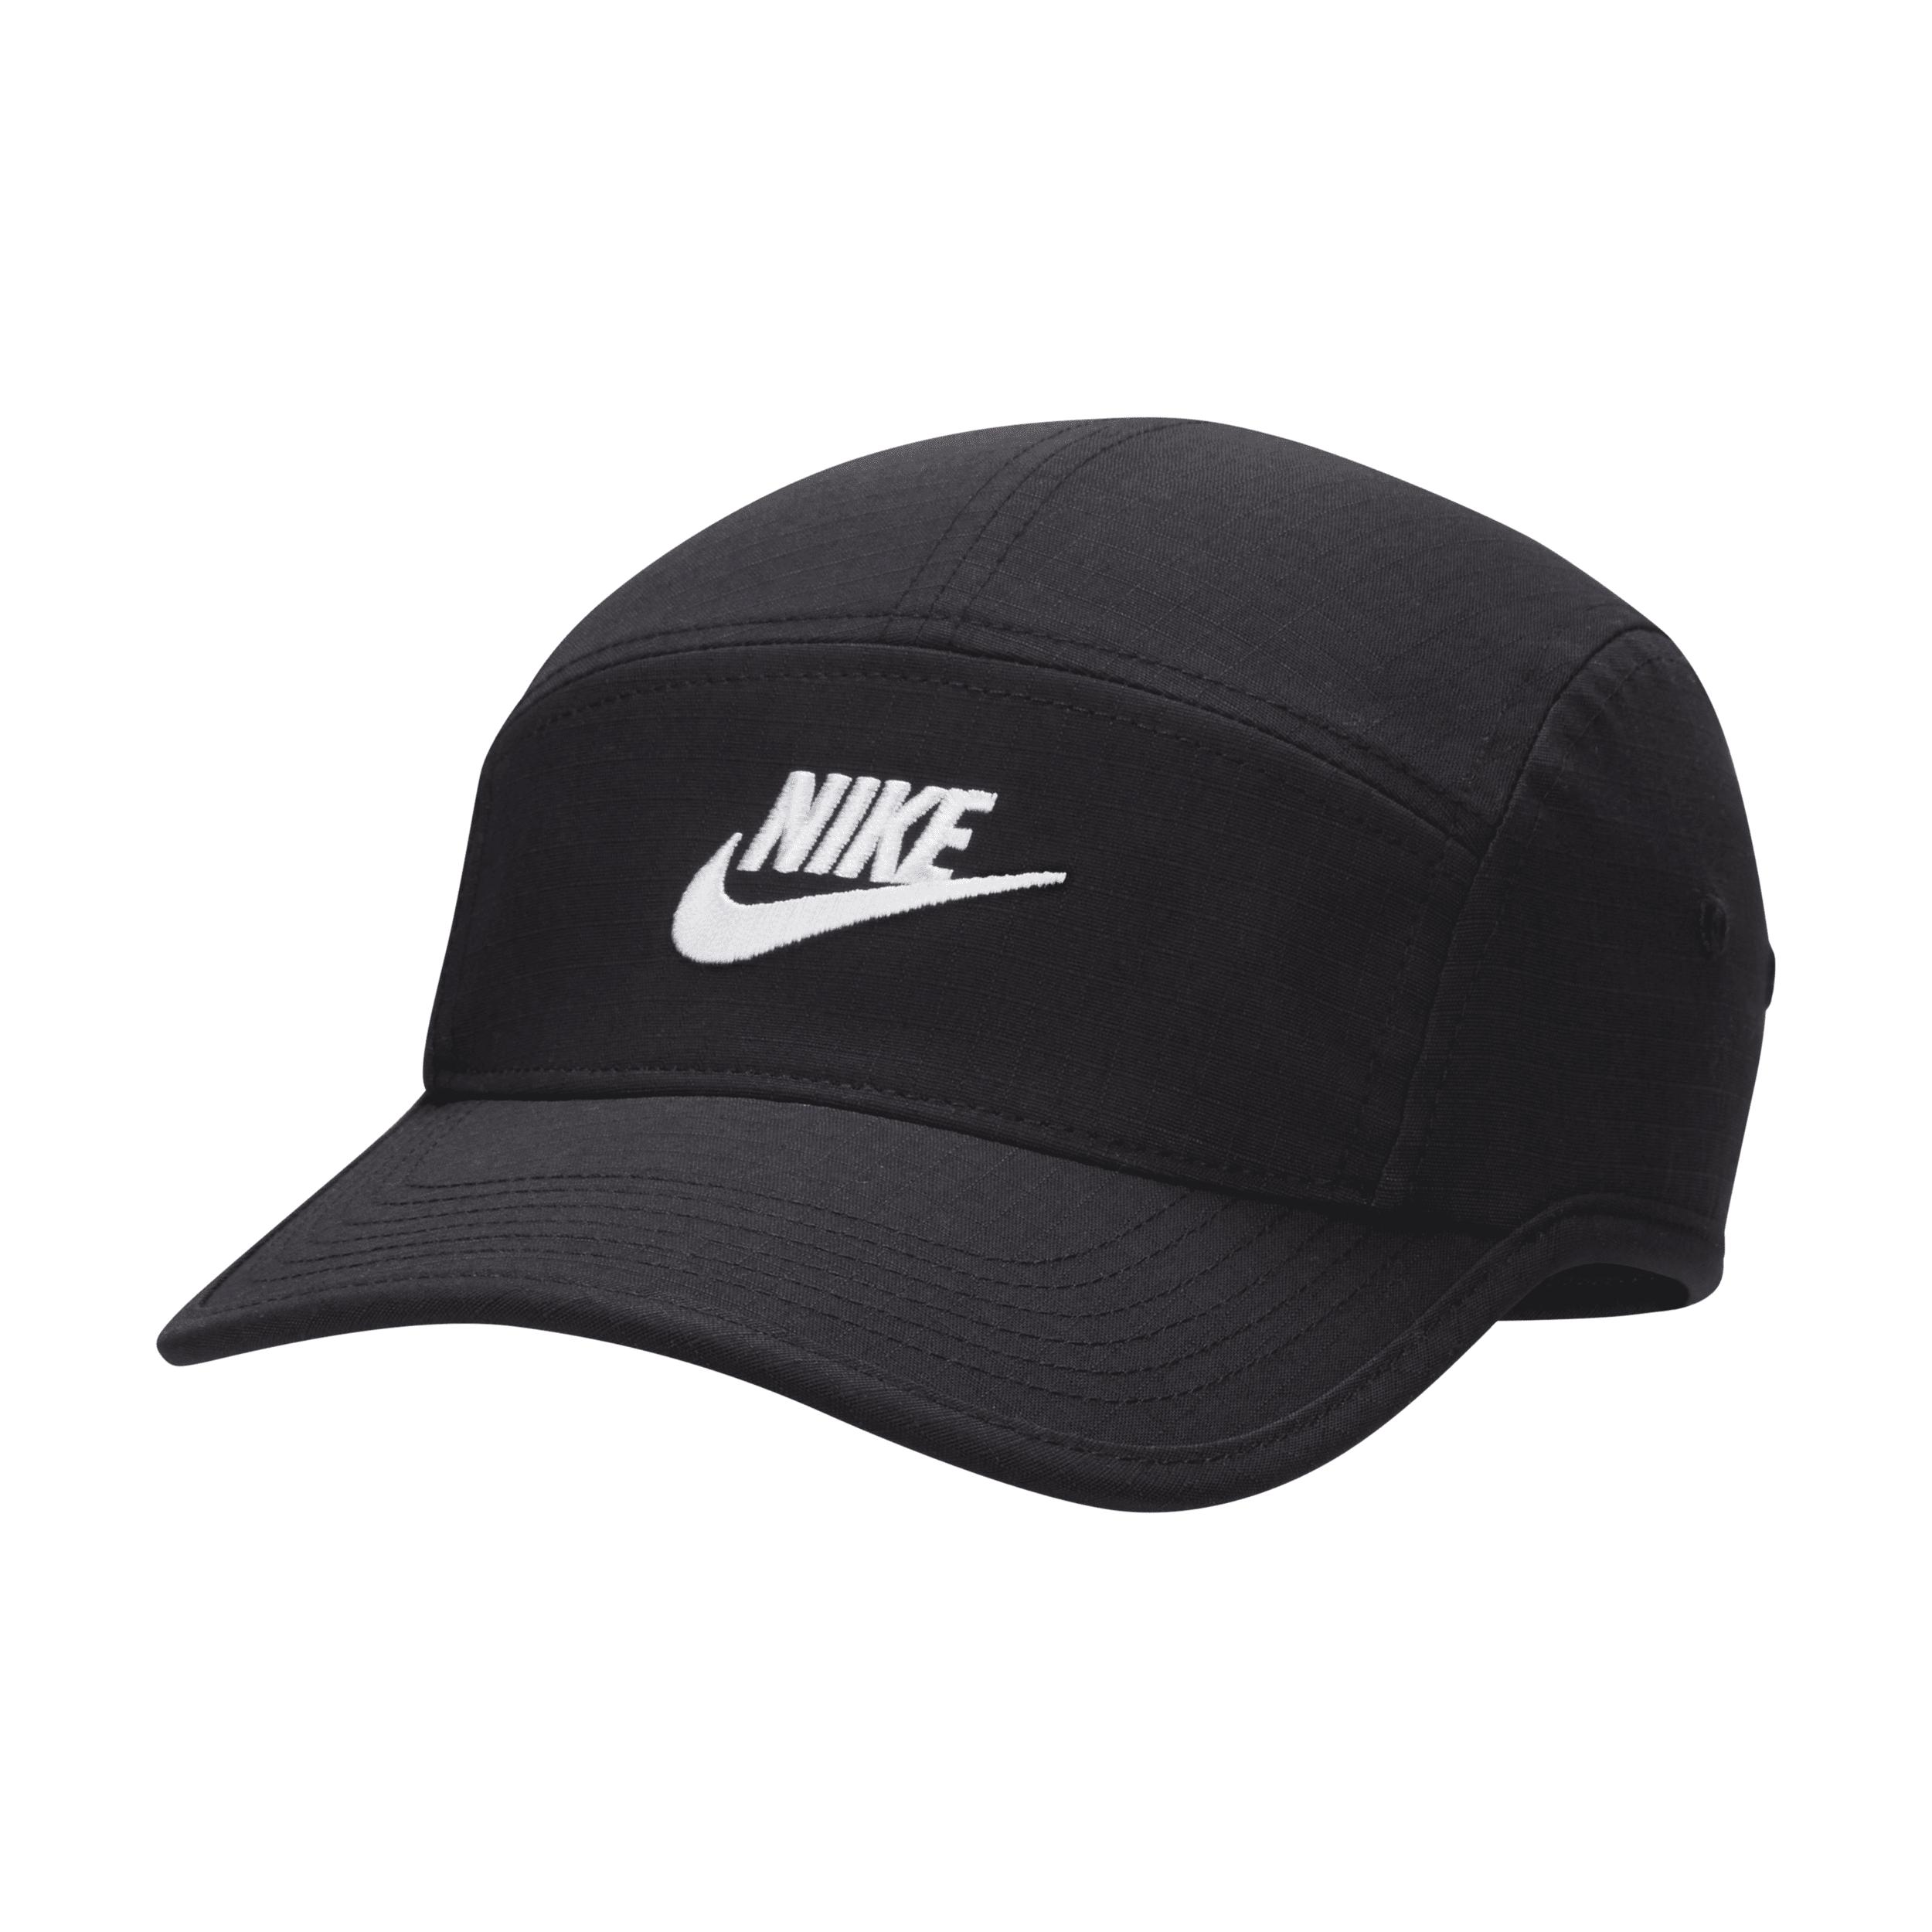 Nike Fly Unstructured Futura Cap in Black | Lyst